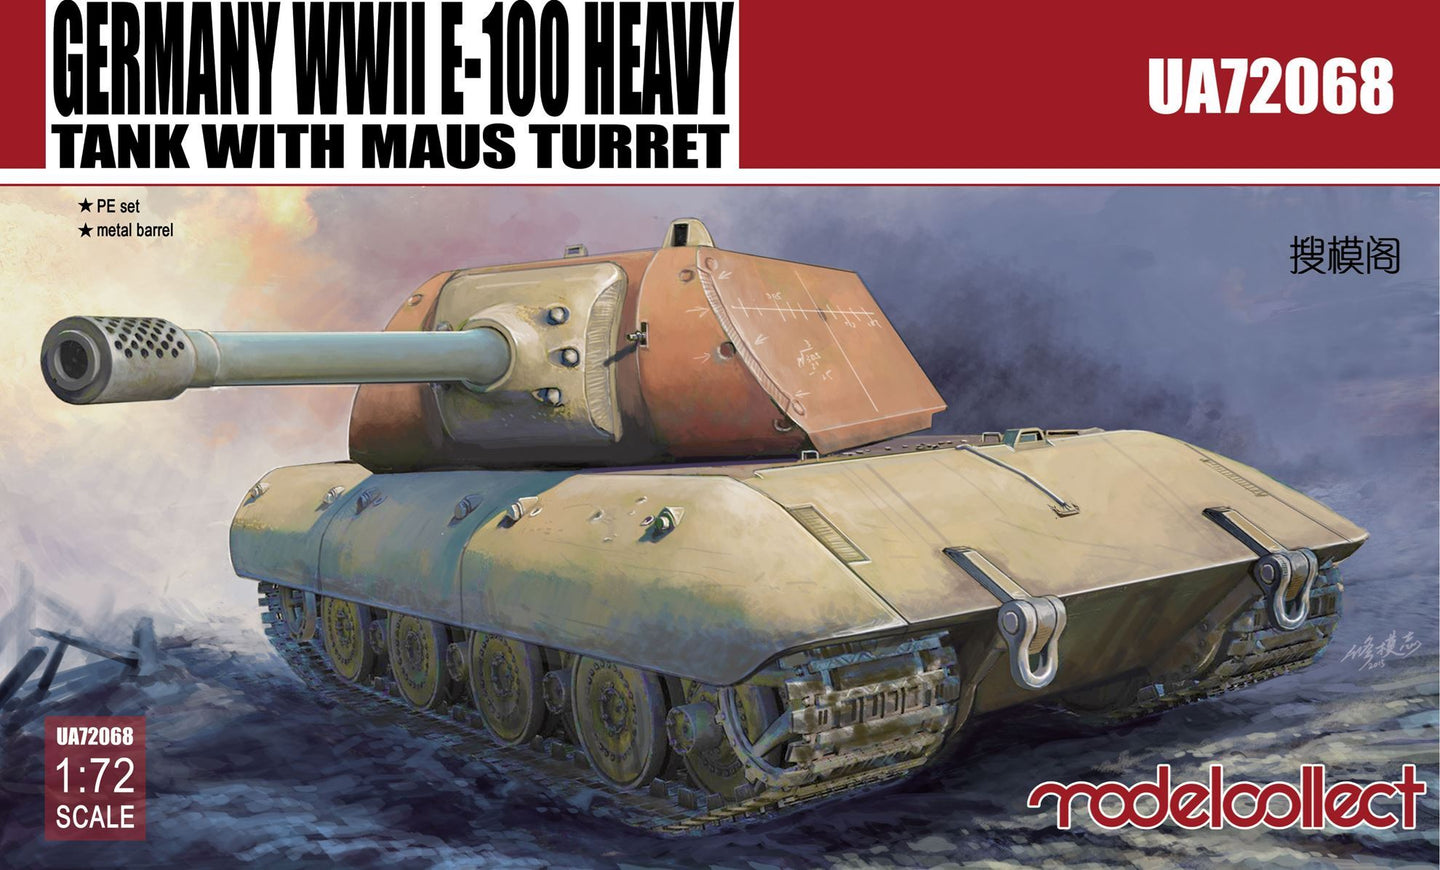 Modelcollect 1/72 German E-100 Heavy Tank with Mouse turret UA72068